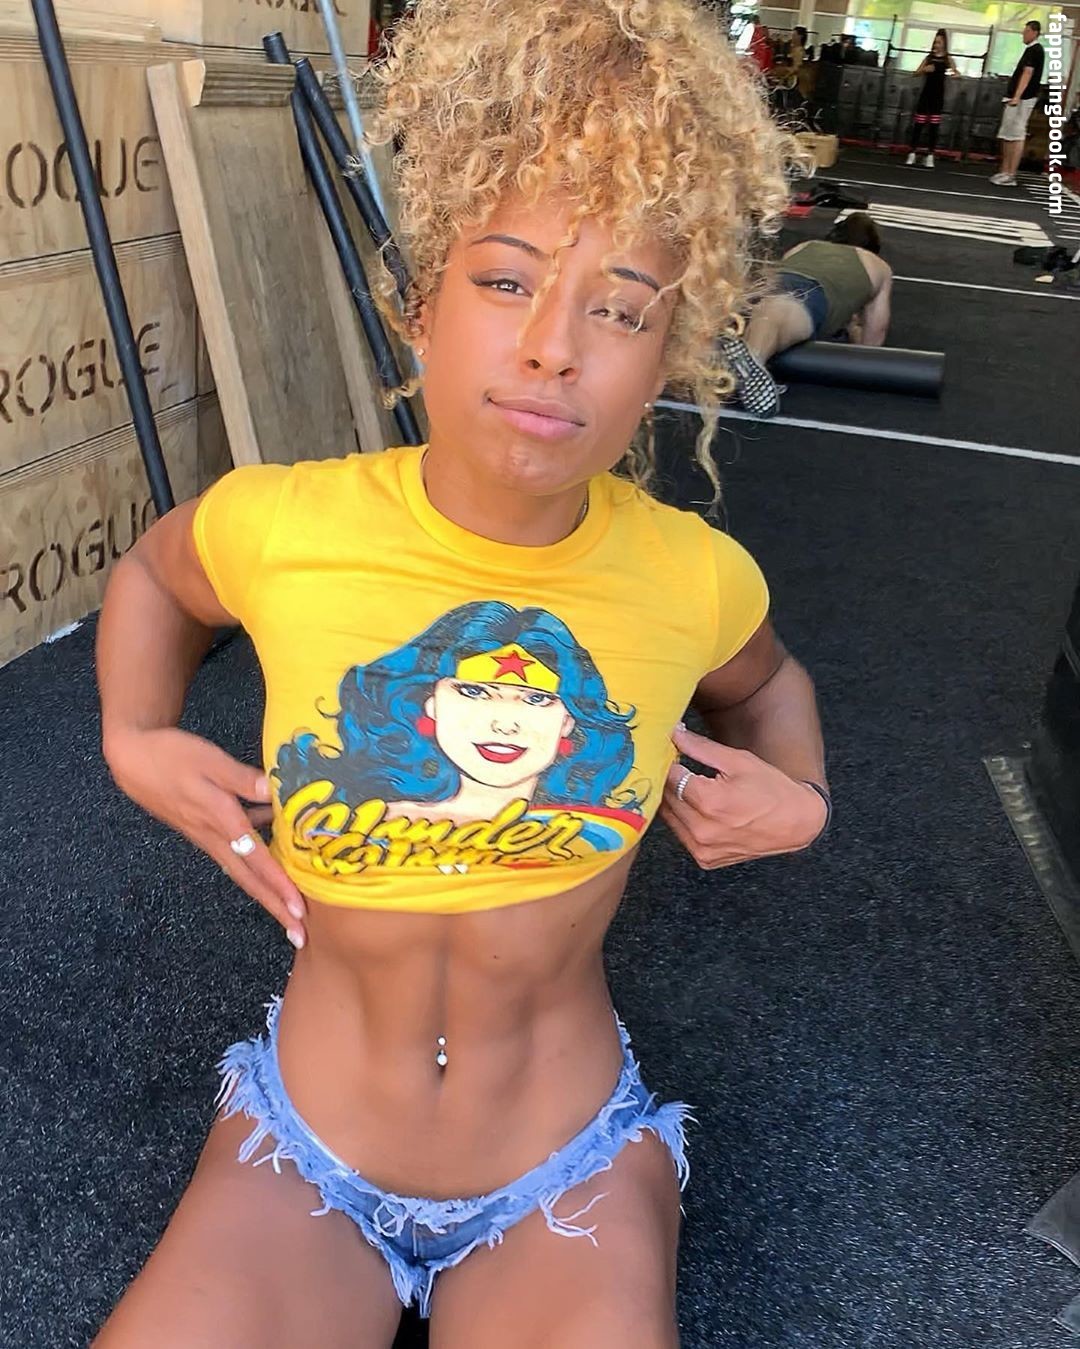 Russo topless qimmah Qimmah Russo